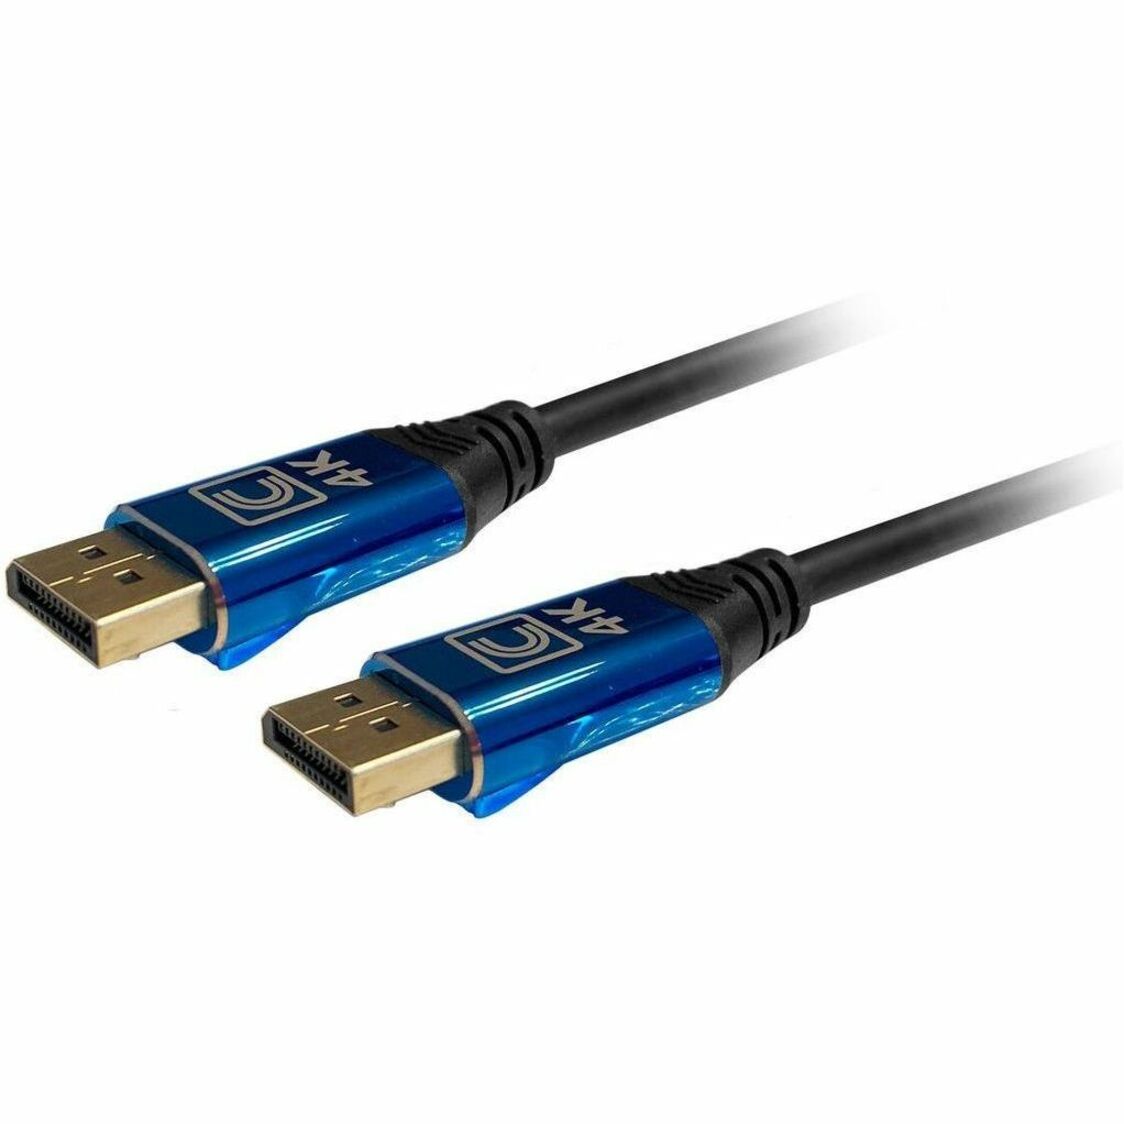 Comprehensive DP-4K-6SP Pro AV/IT Specialist Series 4K Displayport 1.2a Cable 6ft, Locking Latch, HDCP 2.2, 21.6 Gbit/s Data Transfer Rate